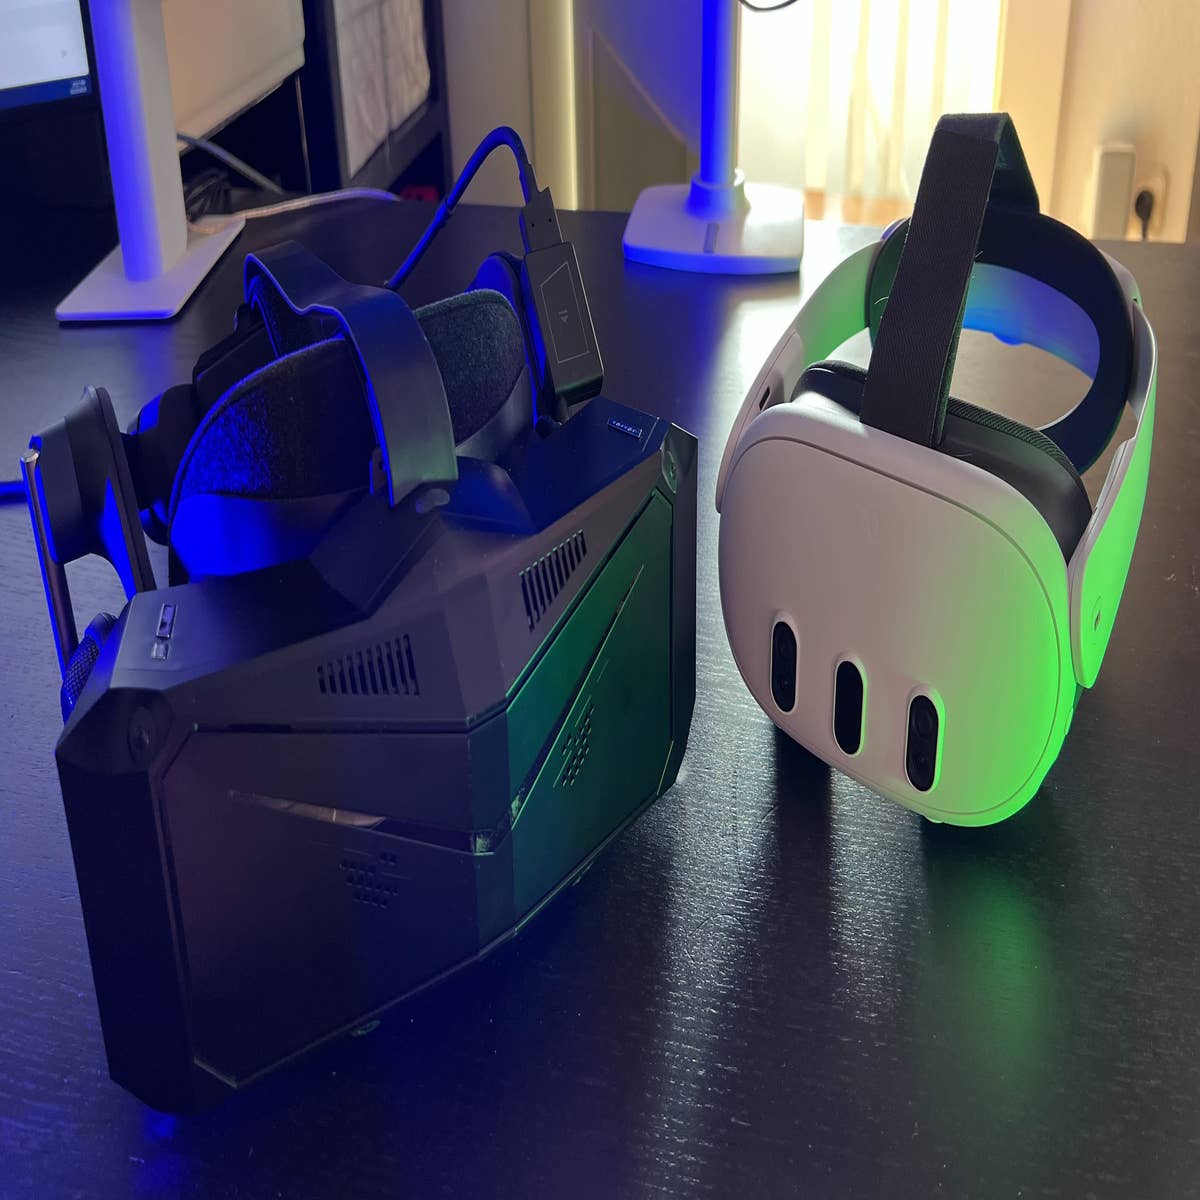 Pimax Crystal Vs Meta Quest 3: A Comparison of VR Headsets — Eightify